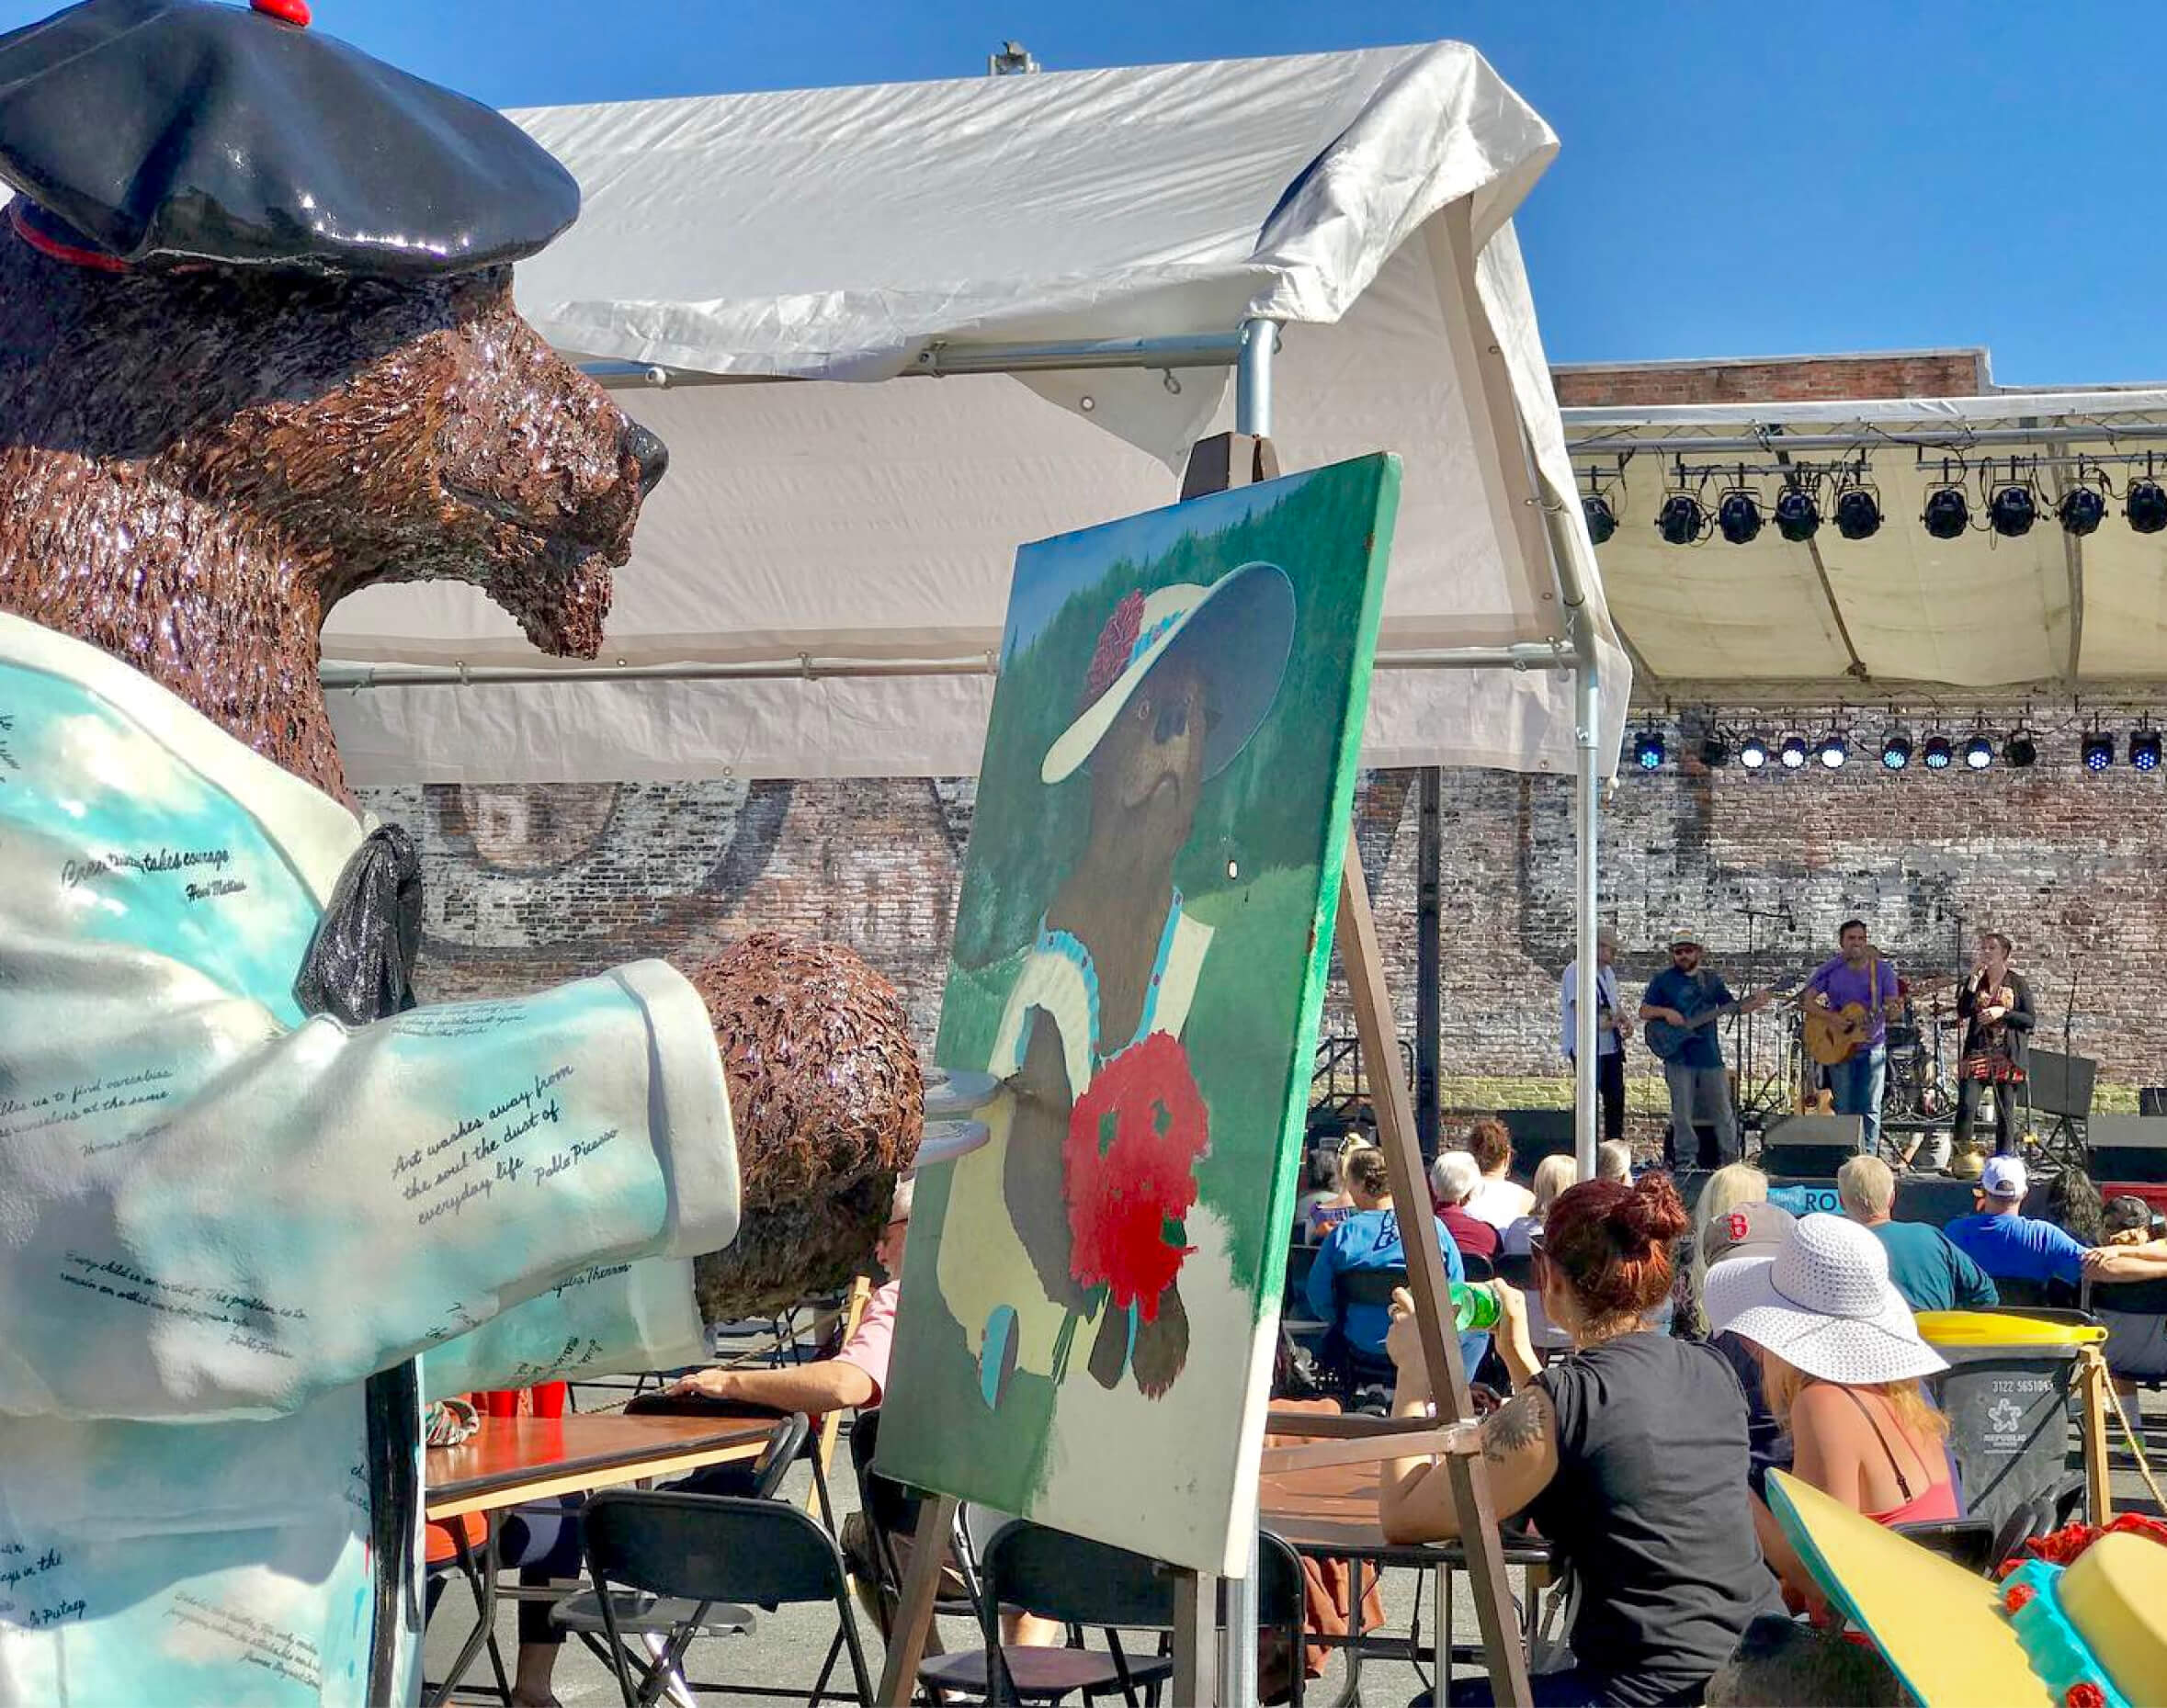 Grants Pass Bear Statue wearing a french berret, painting another bear in front of a concert.